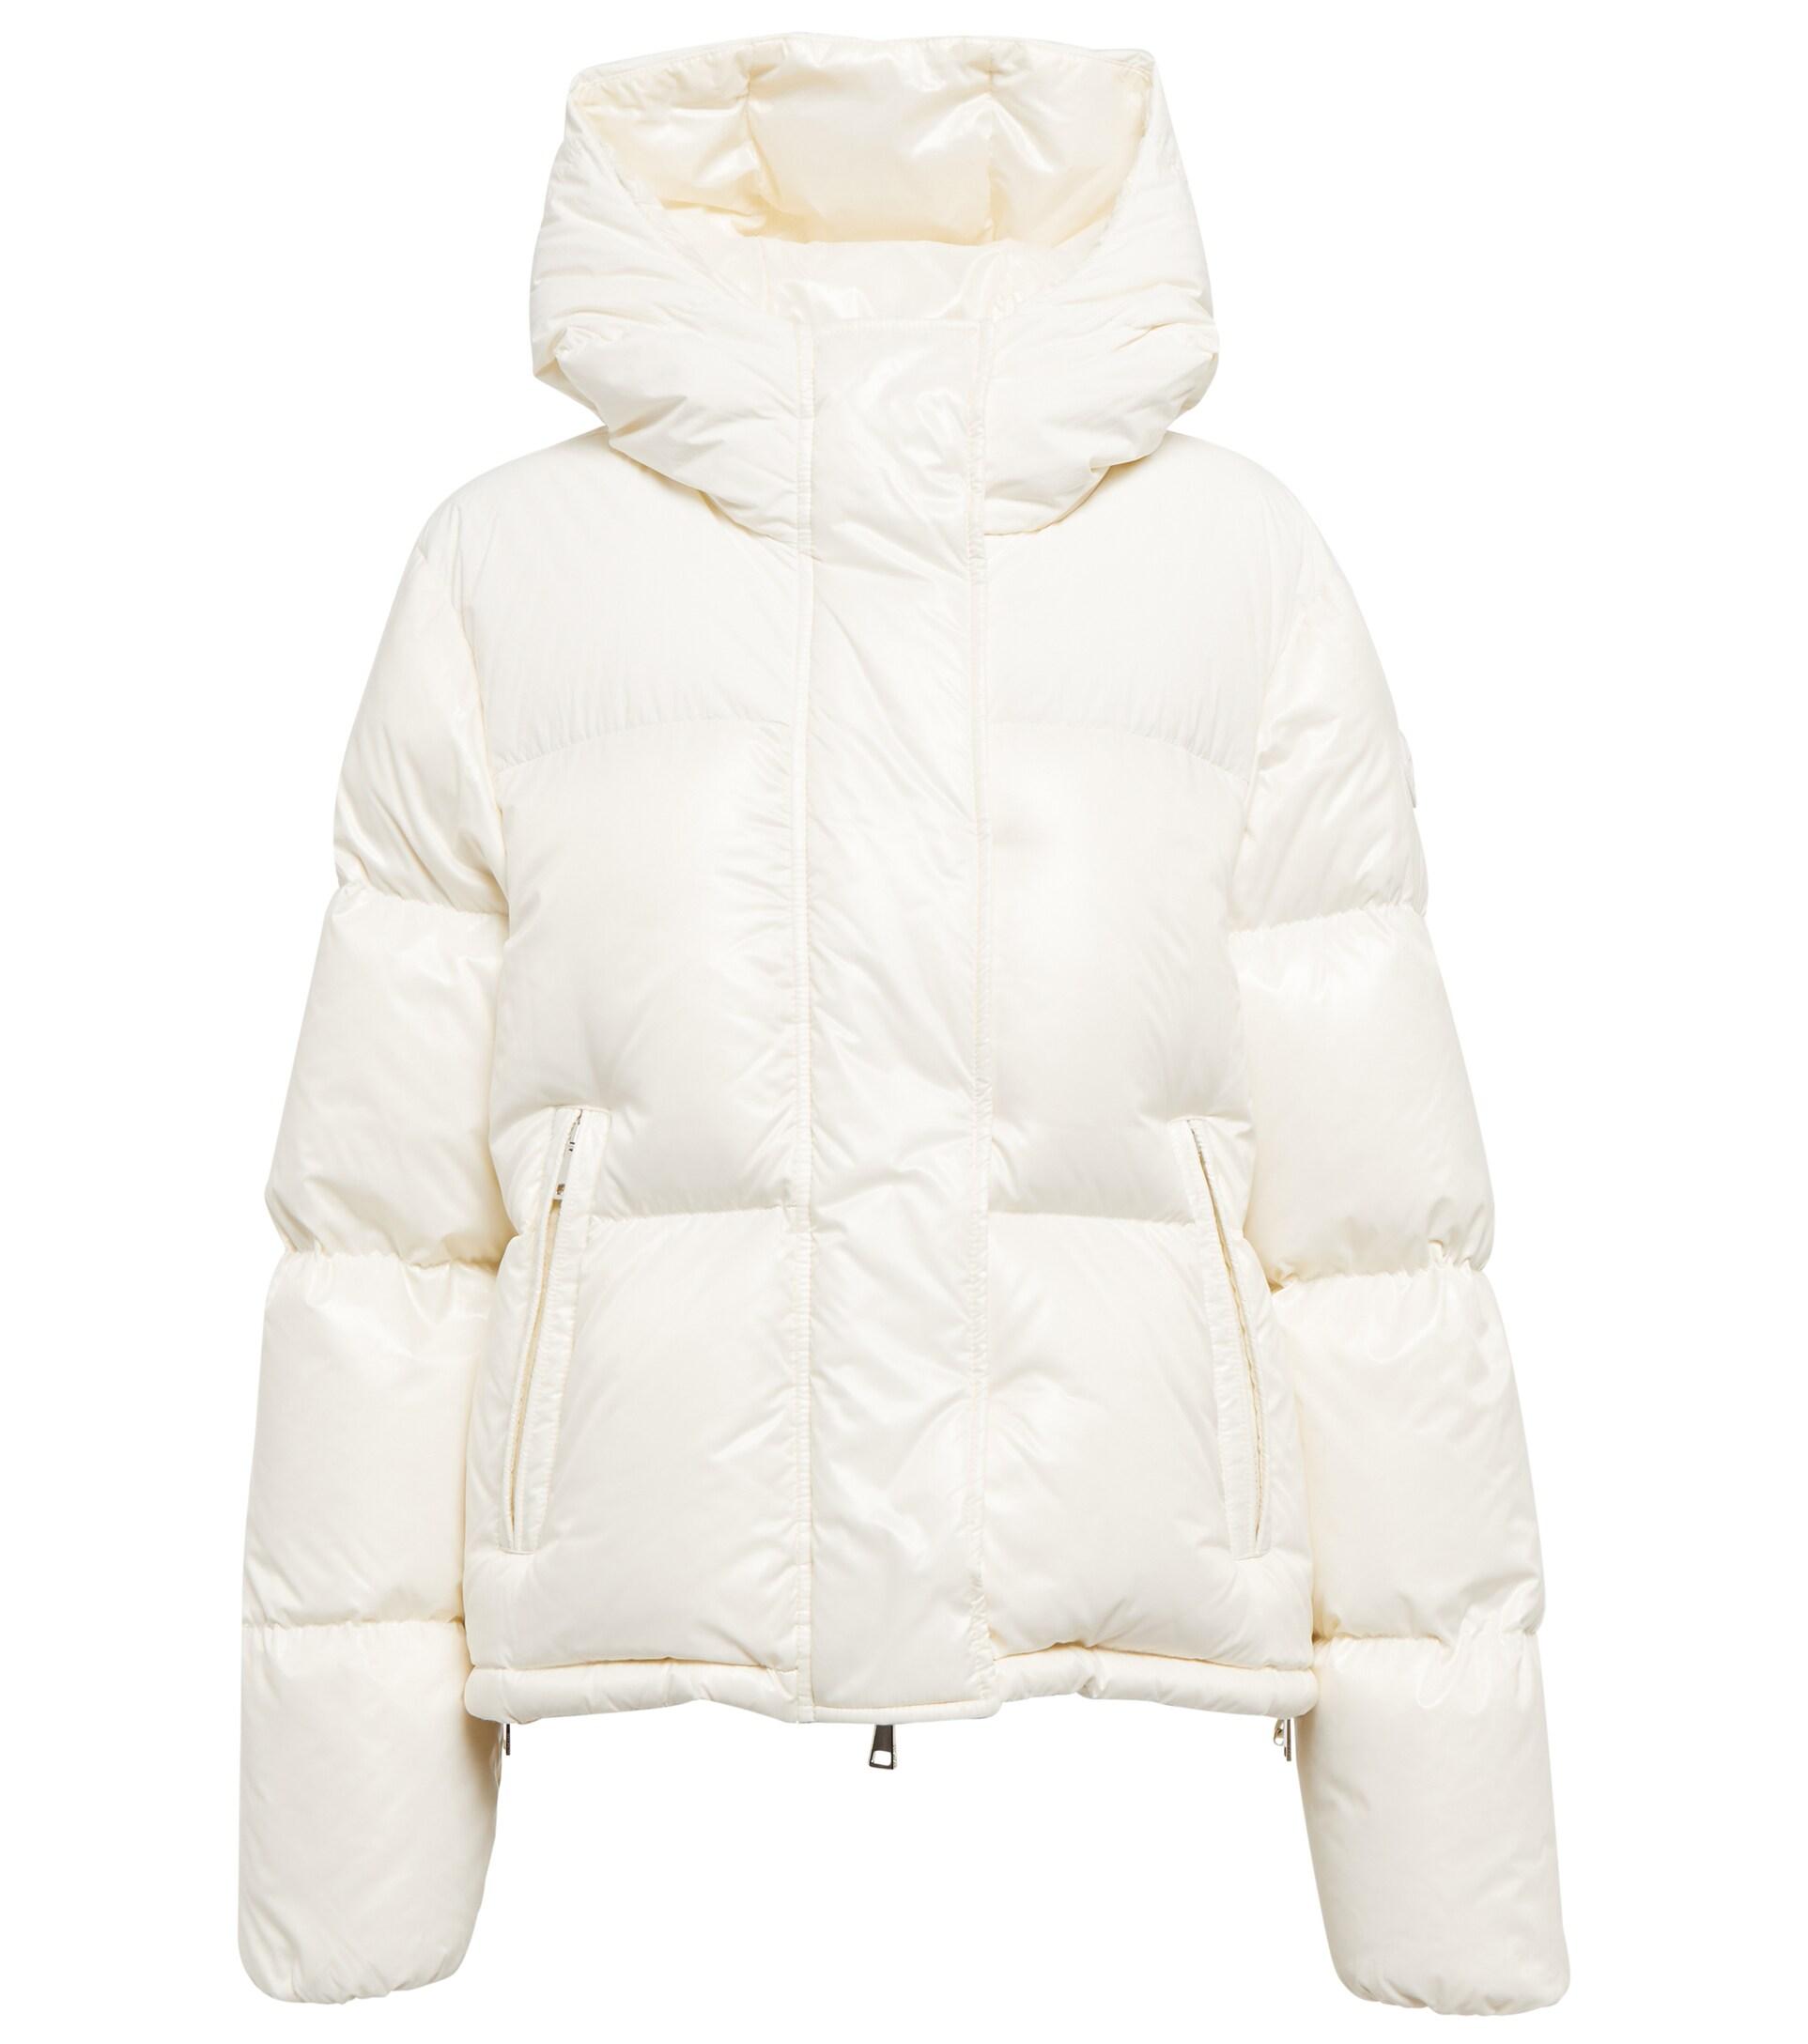 Moncler Gloriettes Down Jacket in White | Lyst